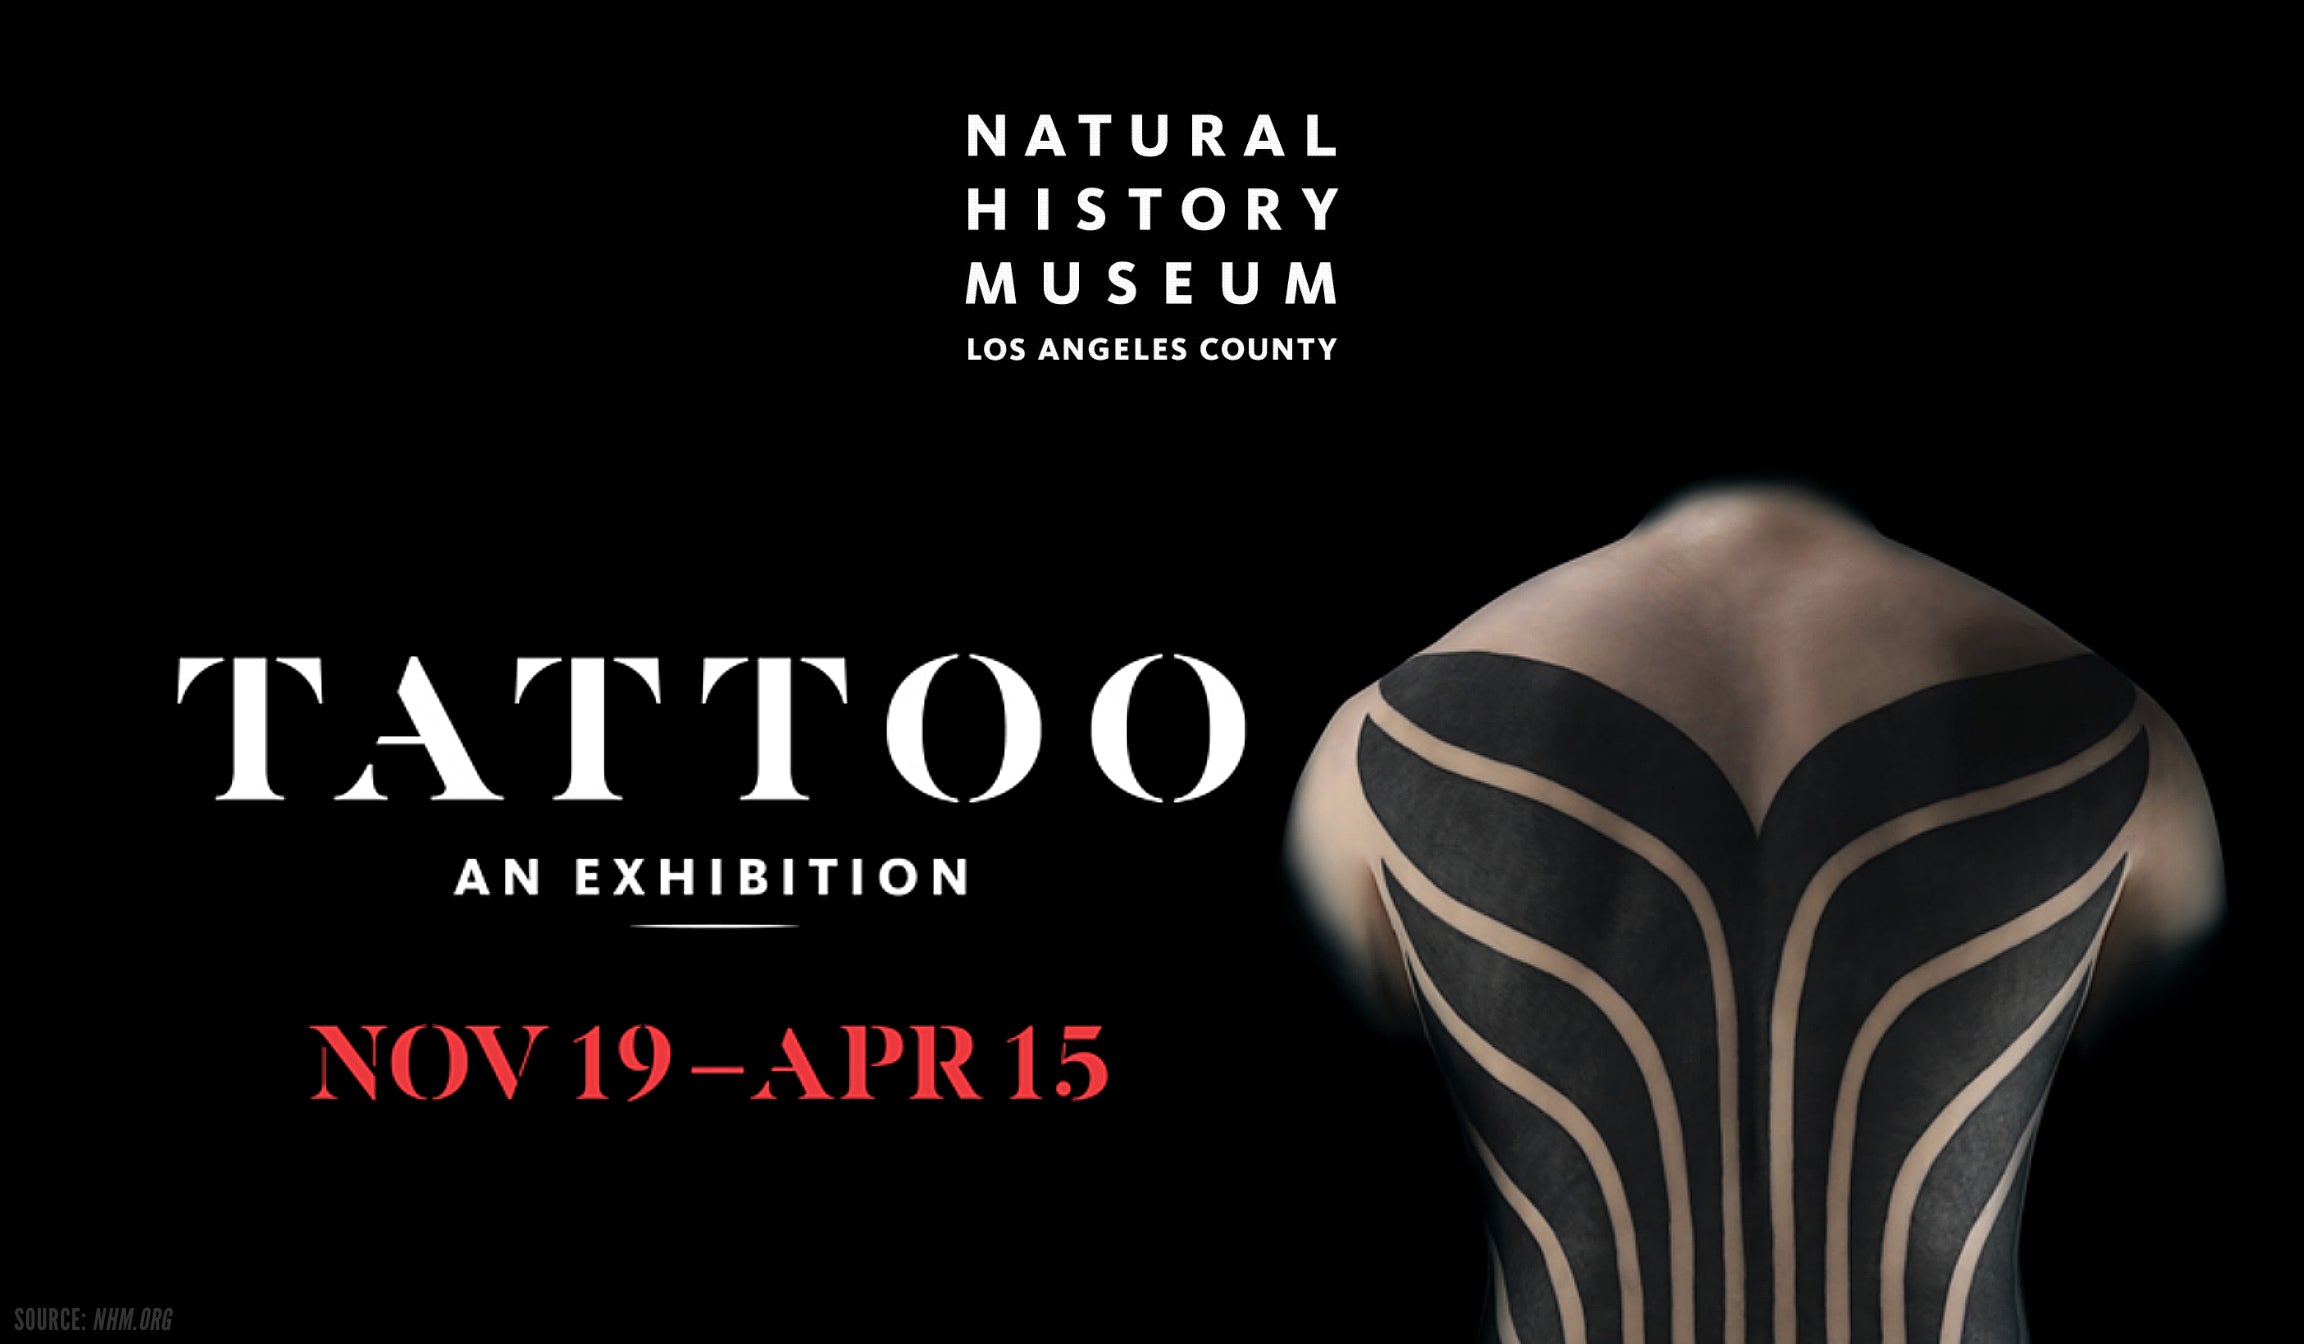 Explore "Tattoo" at the Natural History Museum